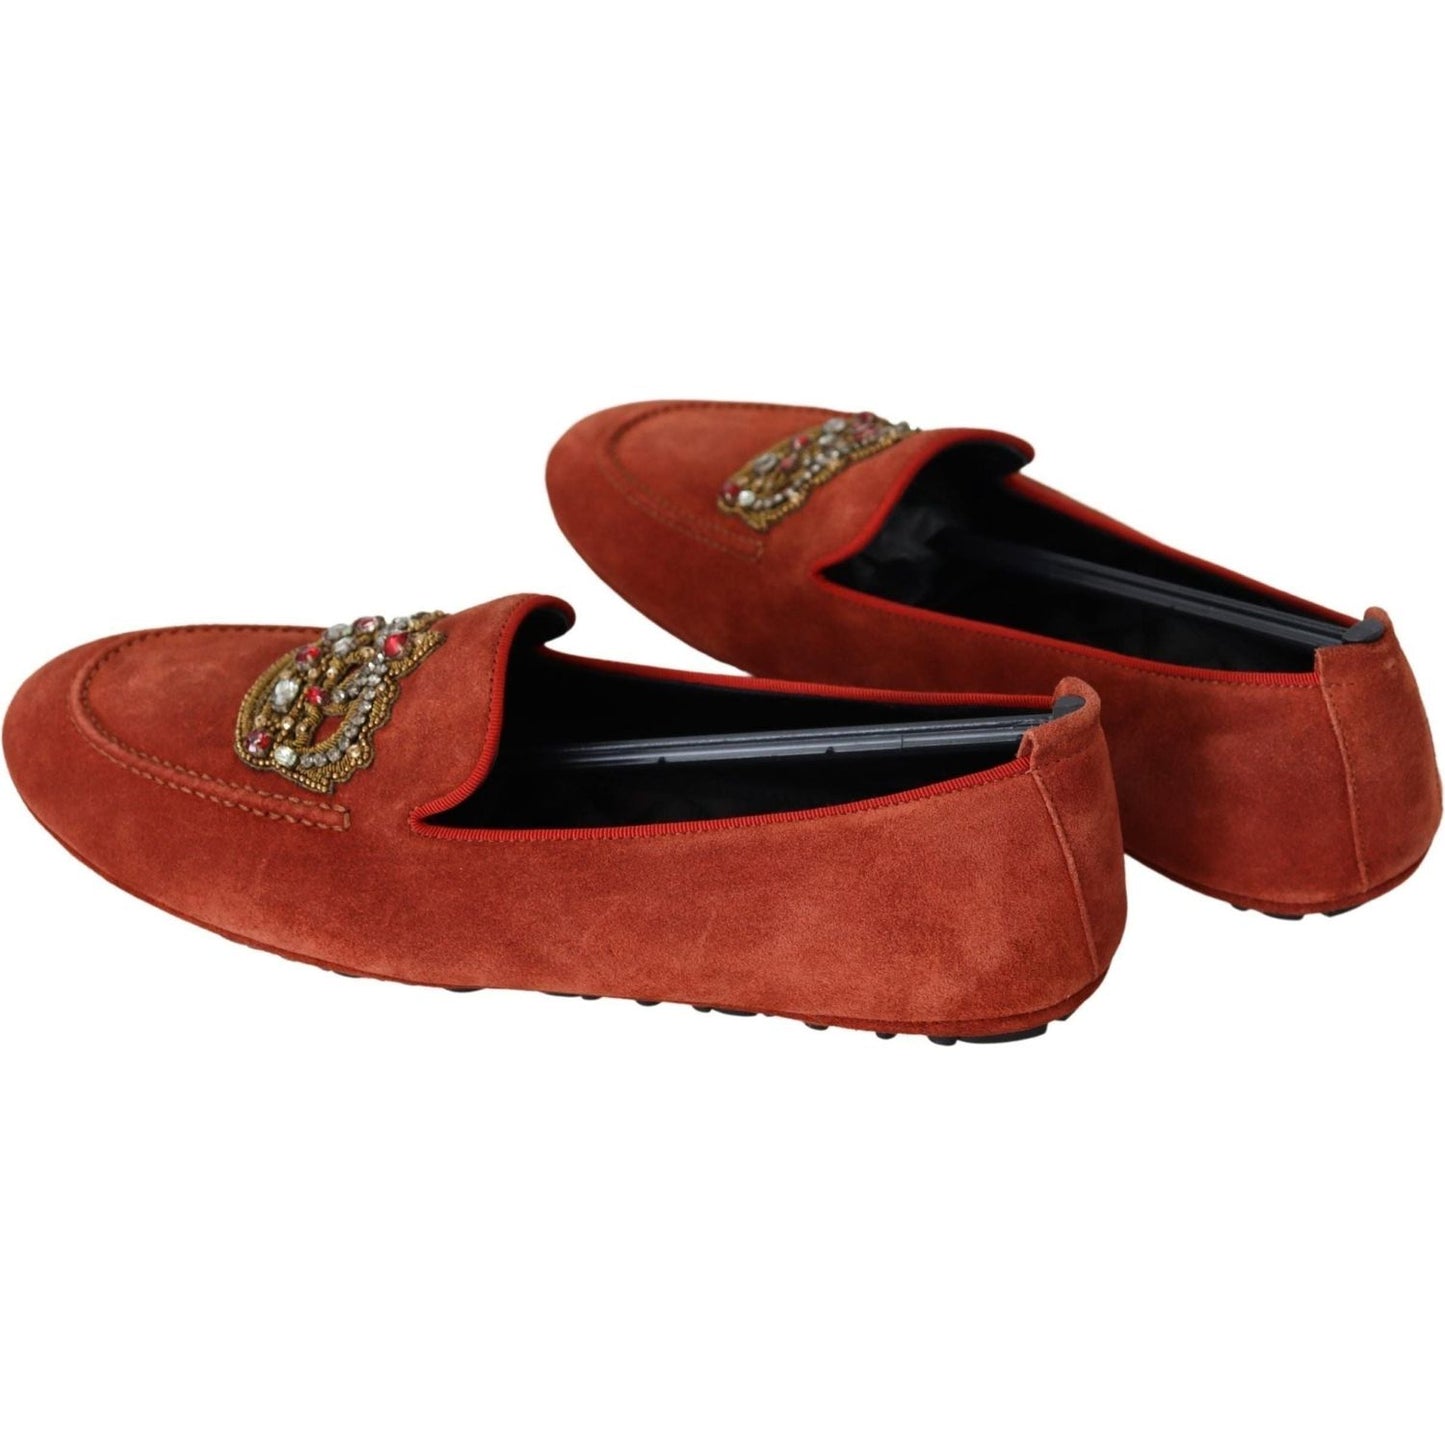 Dolce & Gabbana Opulent Orange Leather Loafers with Gold Embroidery orange-leather-crystal-crown-loafers-shoes